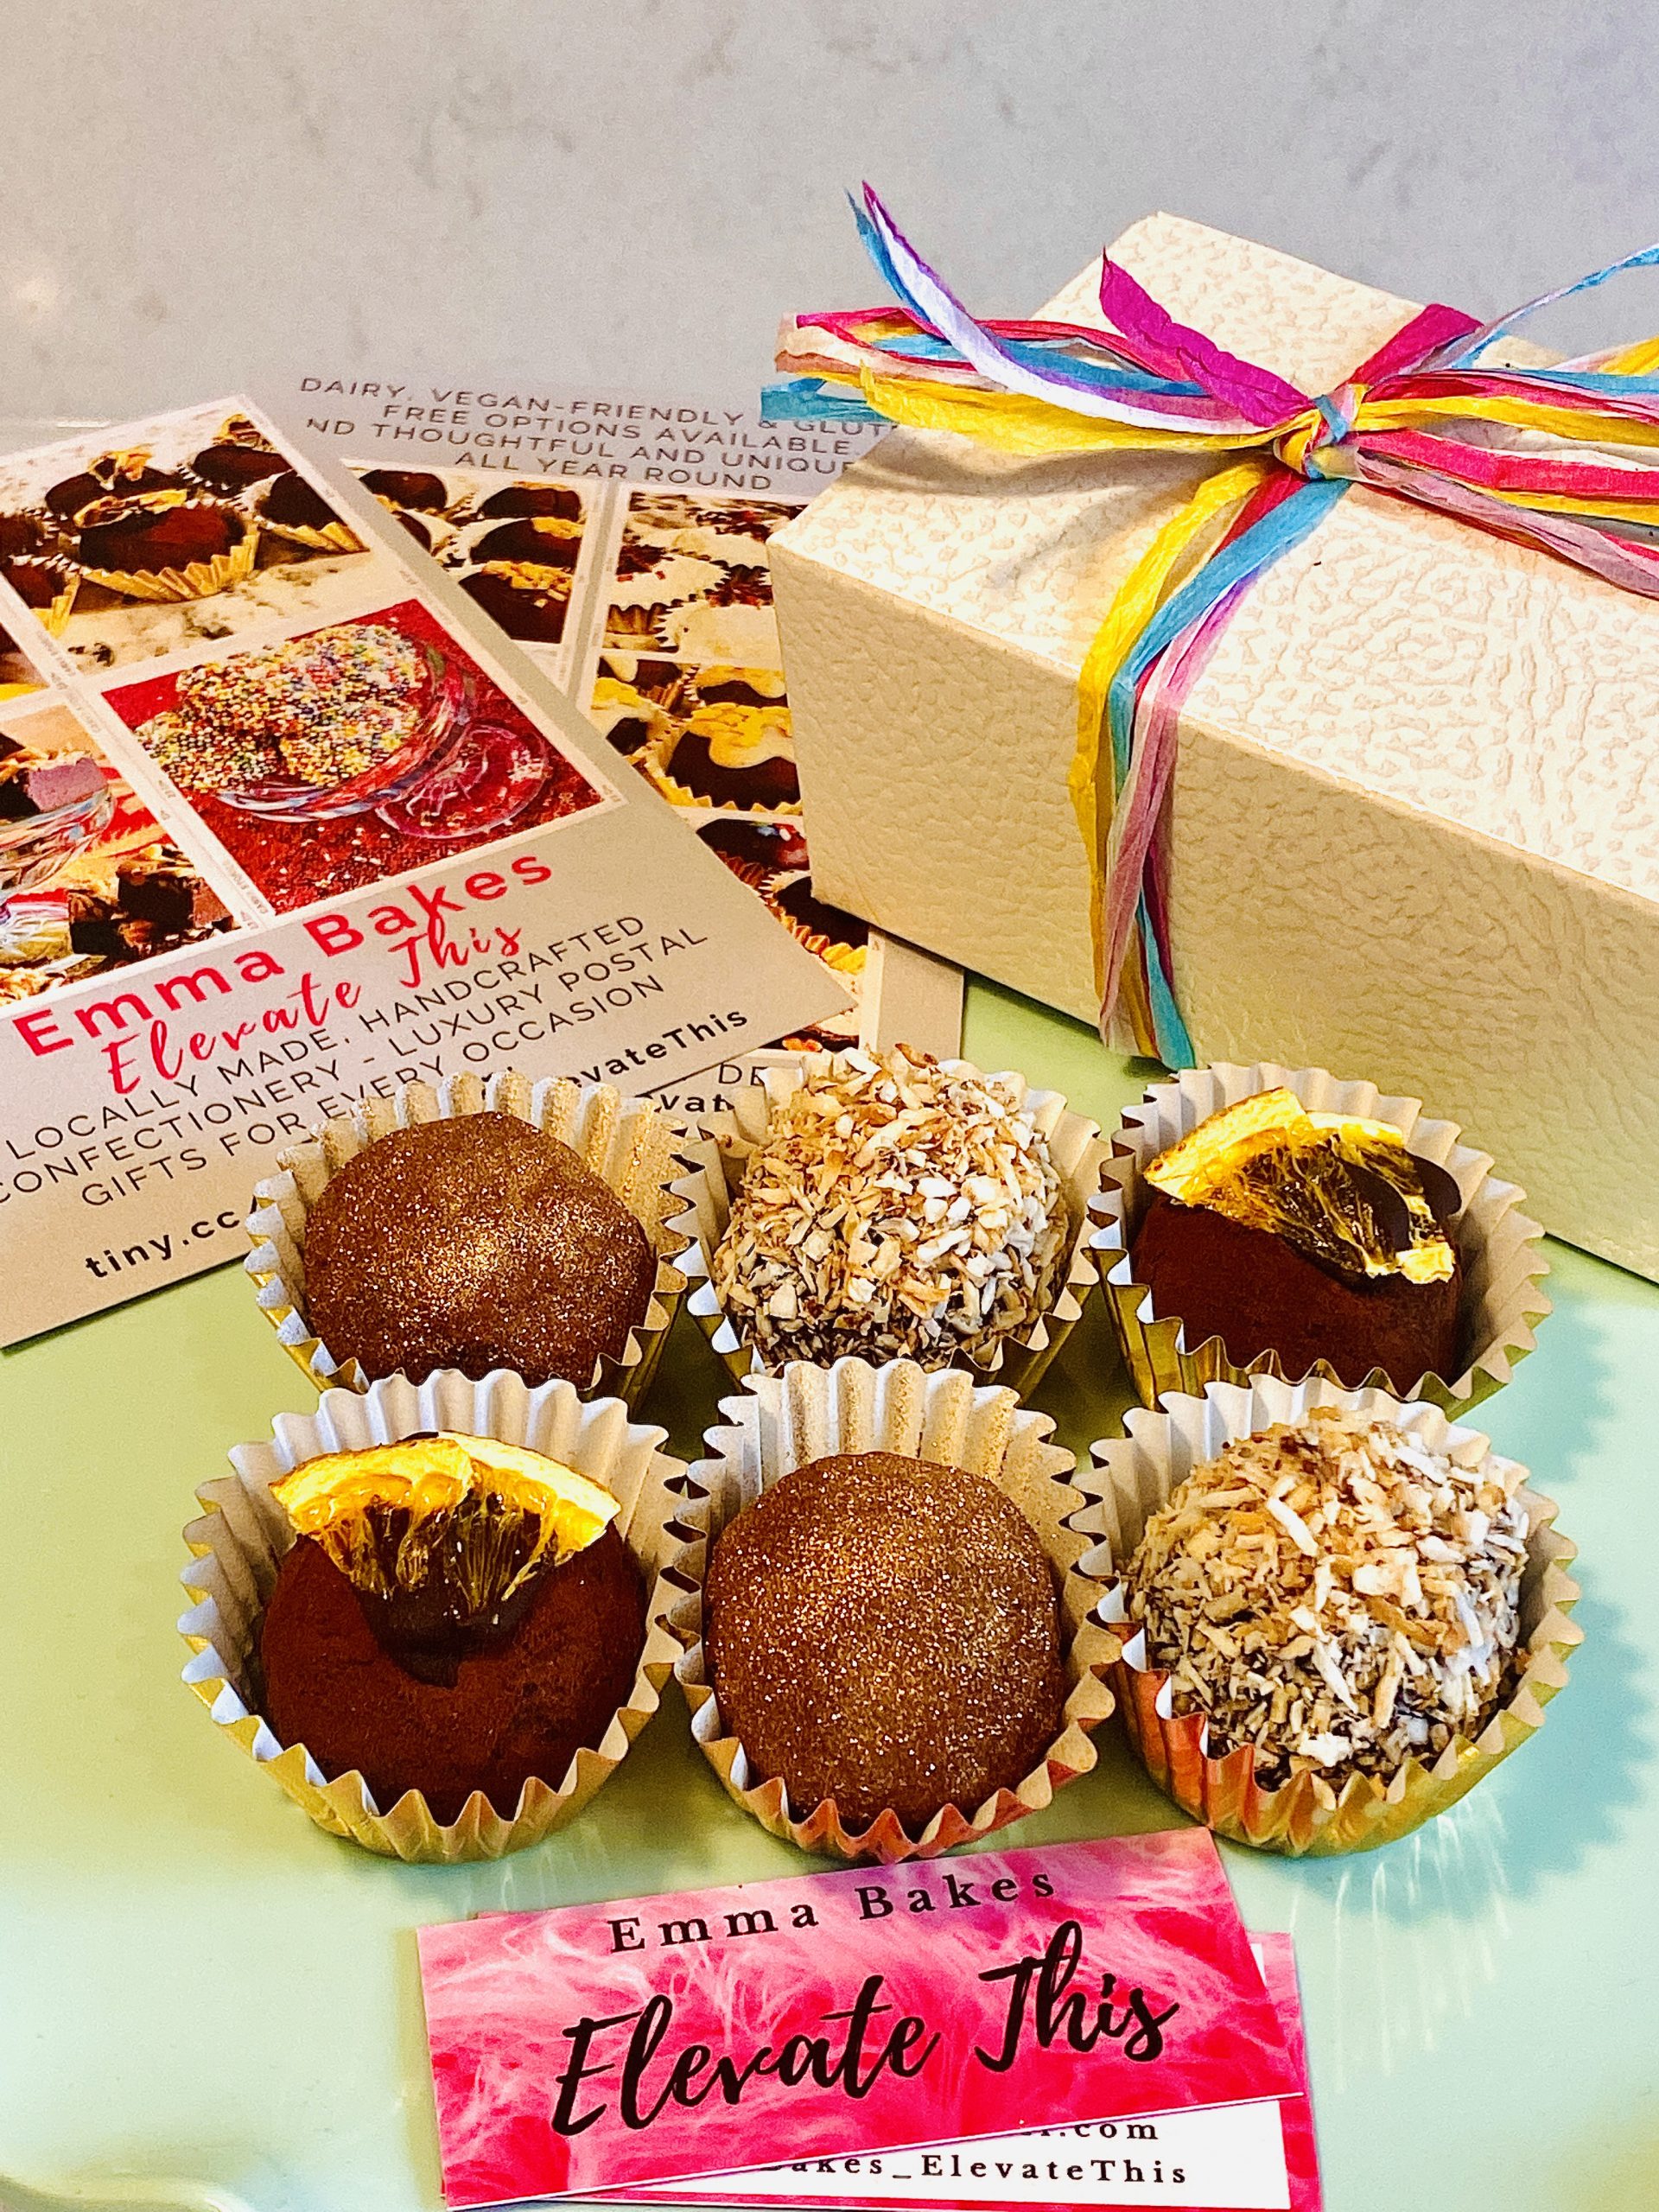 Looking for unique, thoughtful and tasty gift ideas? Try our chocolate gift ideas from EmmaBakes. Chocolate Orange, Chilli and Cinnamon and Chocolate Coconut truffles are such crowdpleasers, perfect for any special occasion.